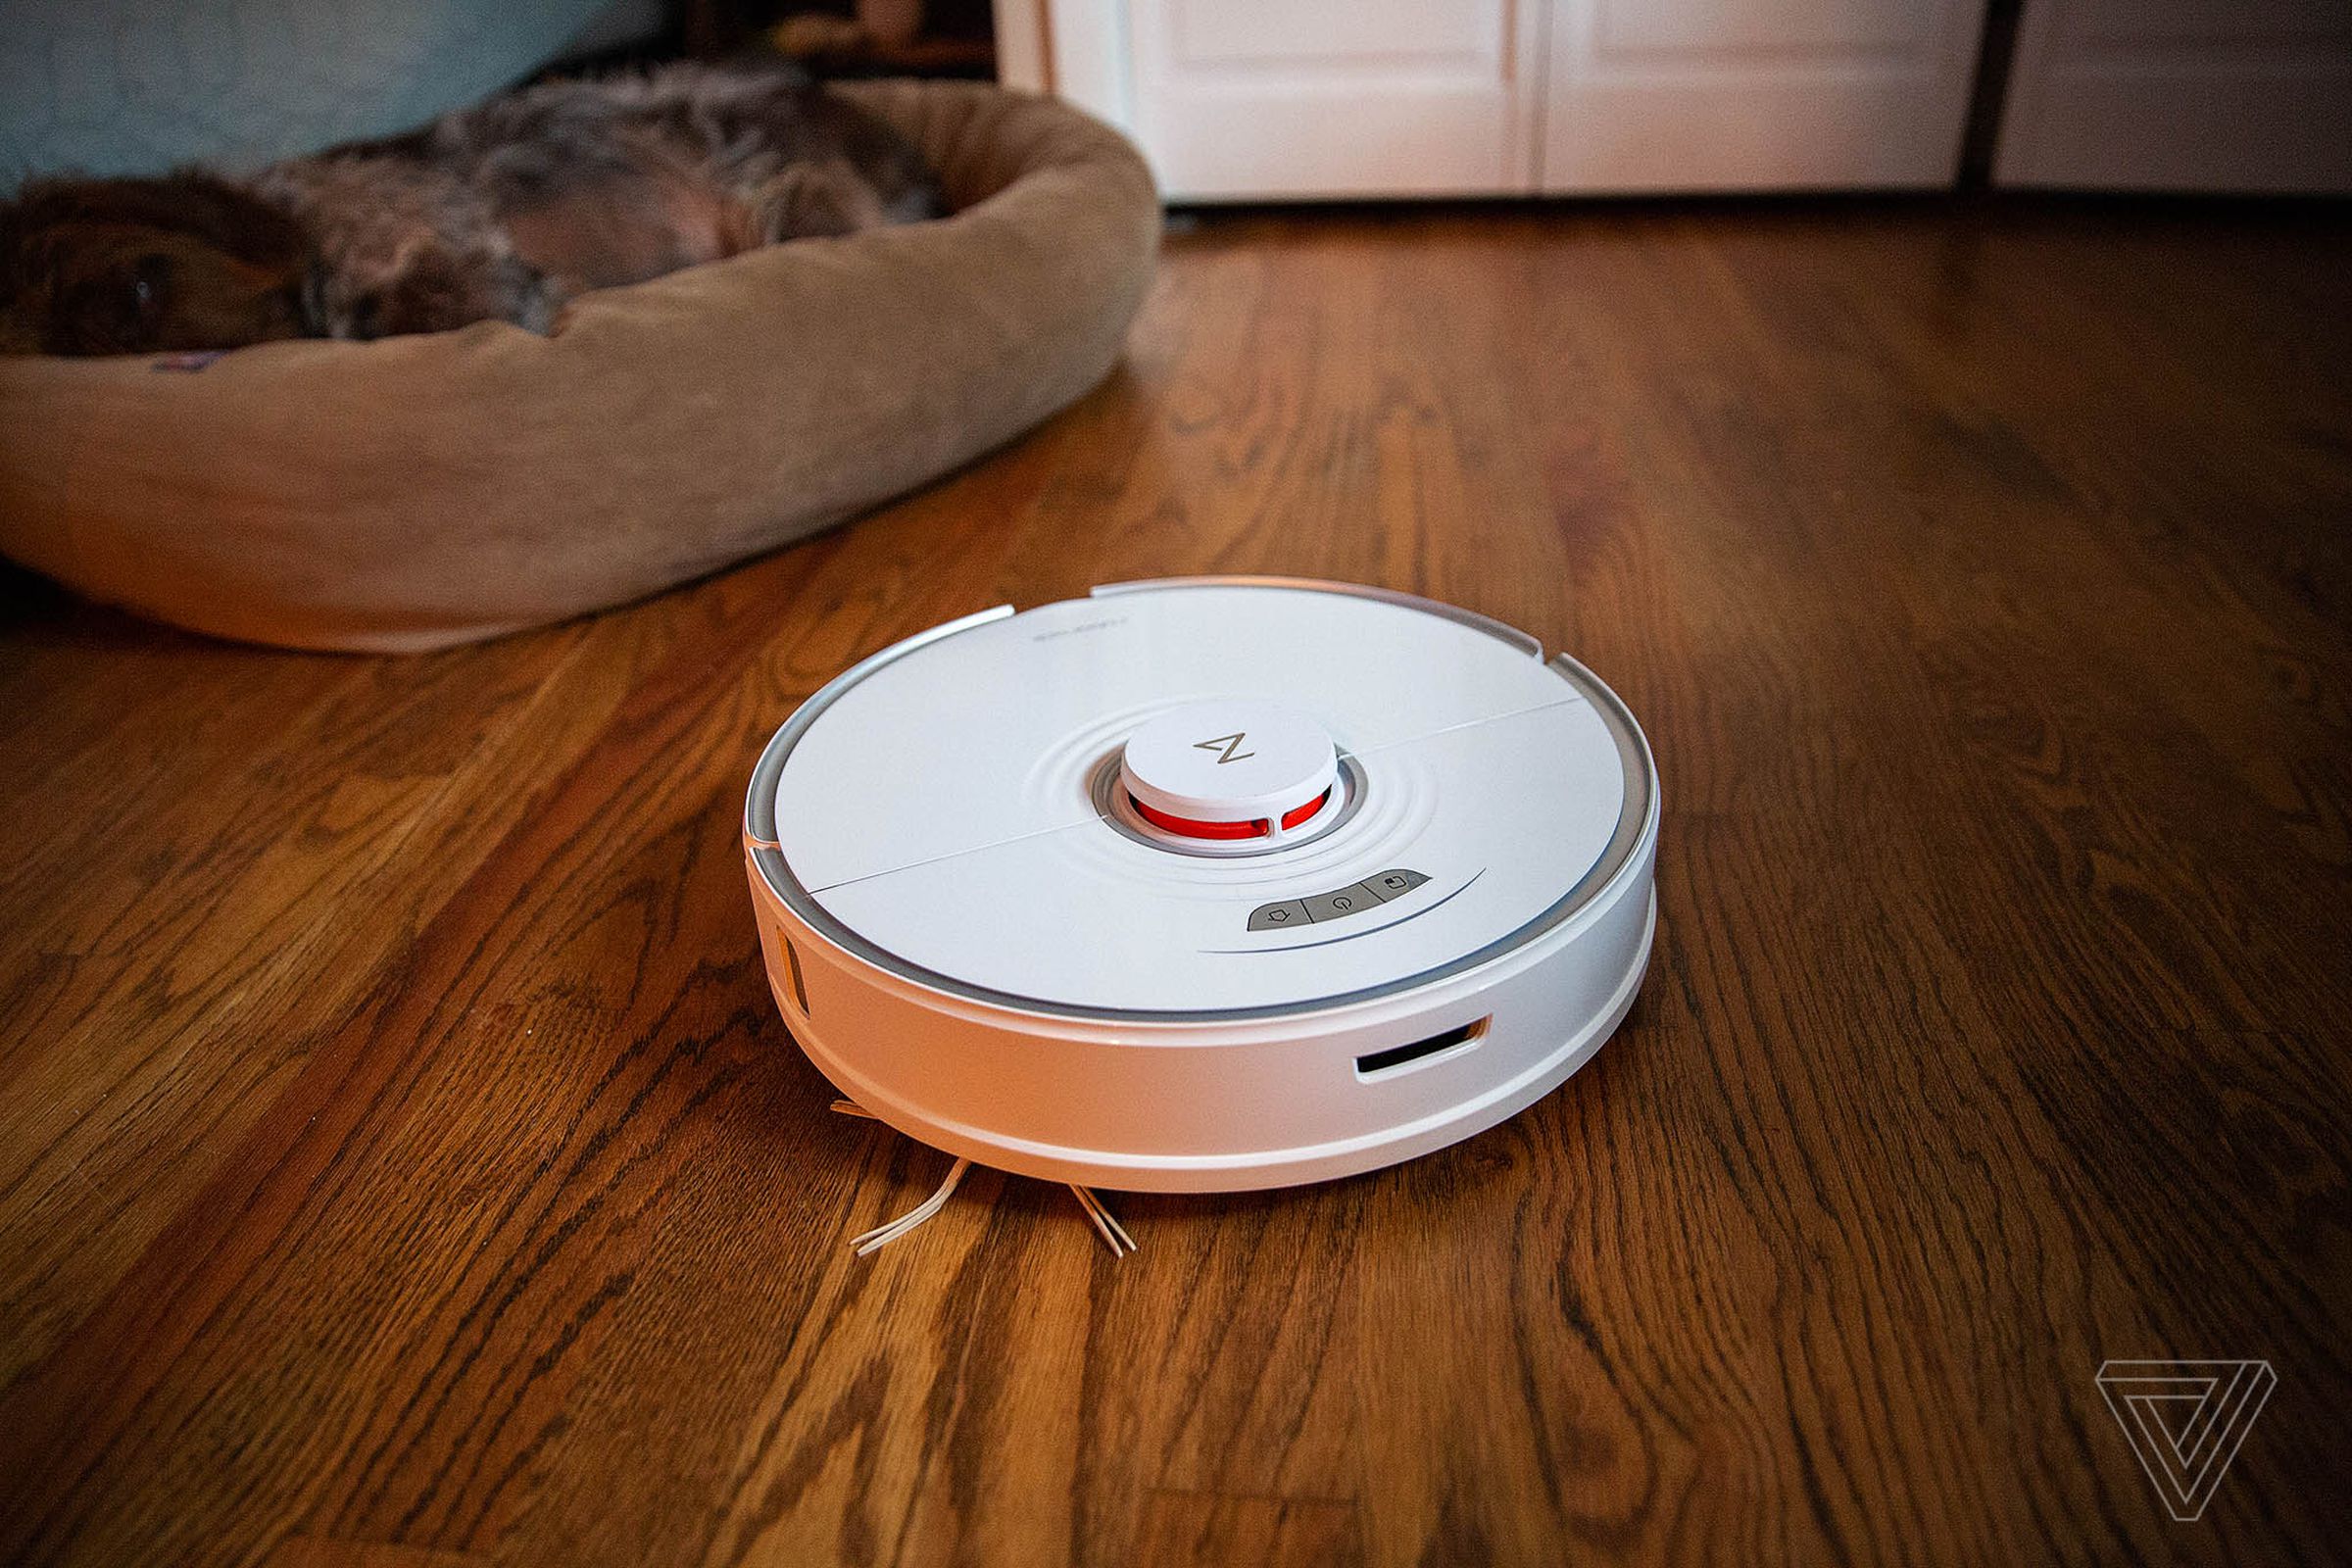 The excellent Roborock S7 mop / vacuum hybrid robot vacuum is $220 off for Prime Day.